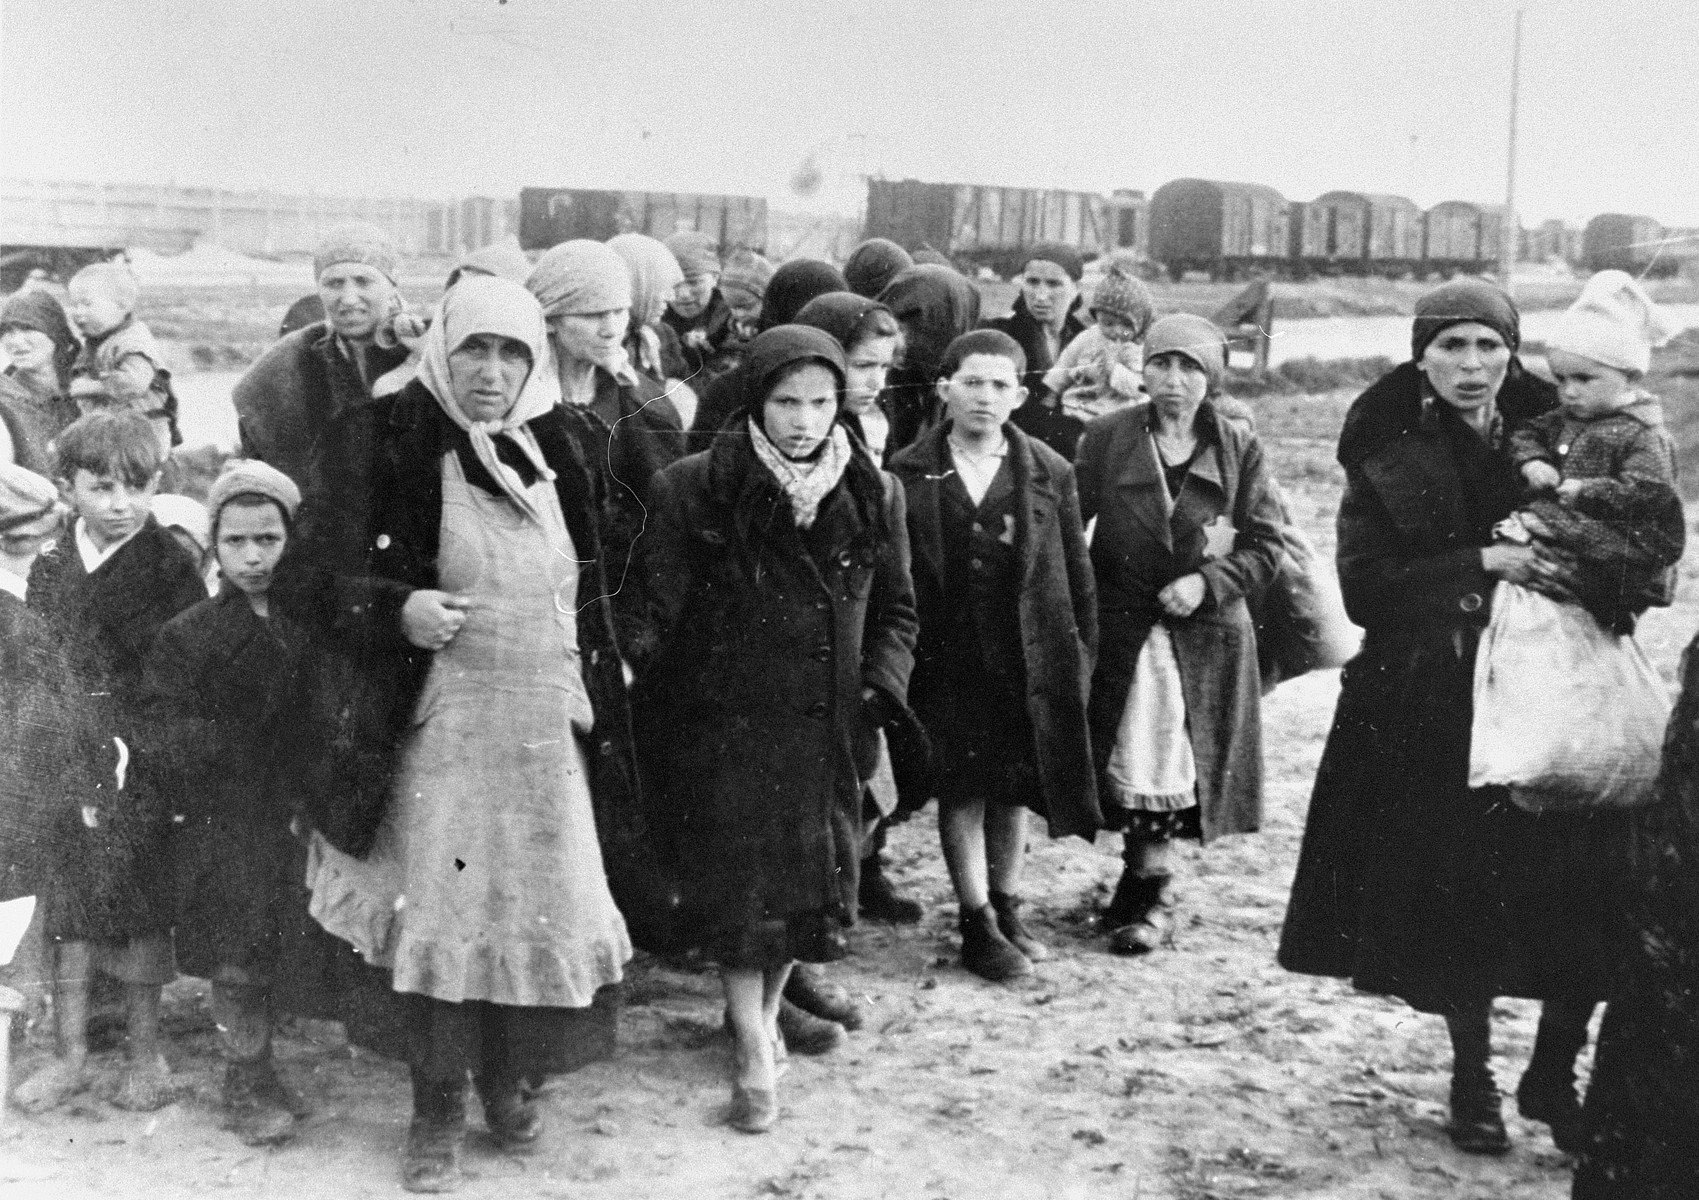 Jewish women and children from Subcarpathian Rus who have been selected for death at Auschwitz-Birkenau, wait to be taken to the gas chambers.